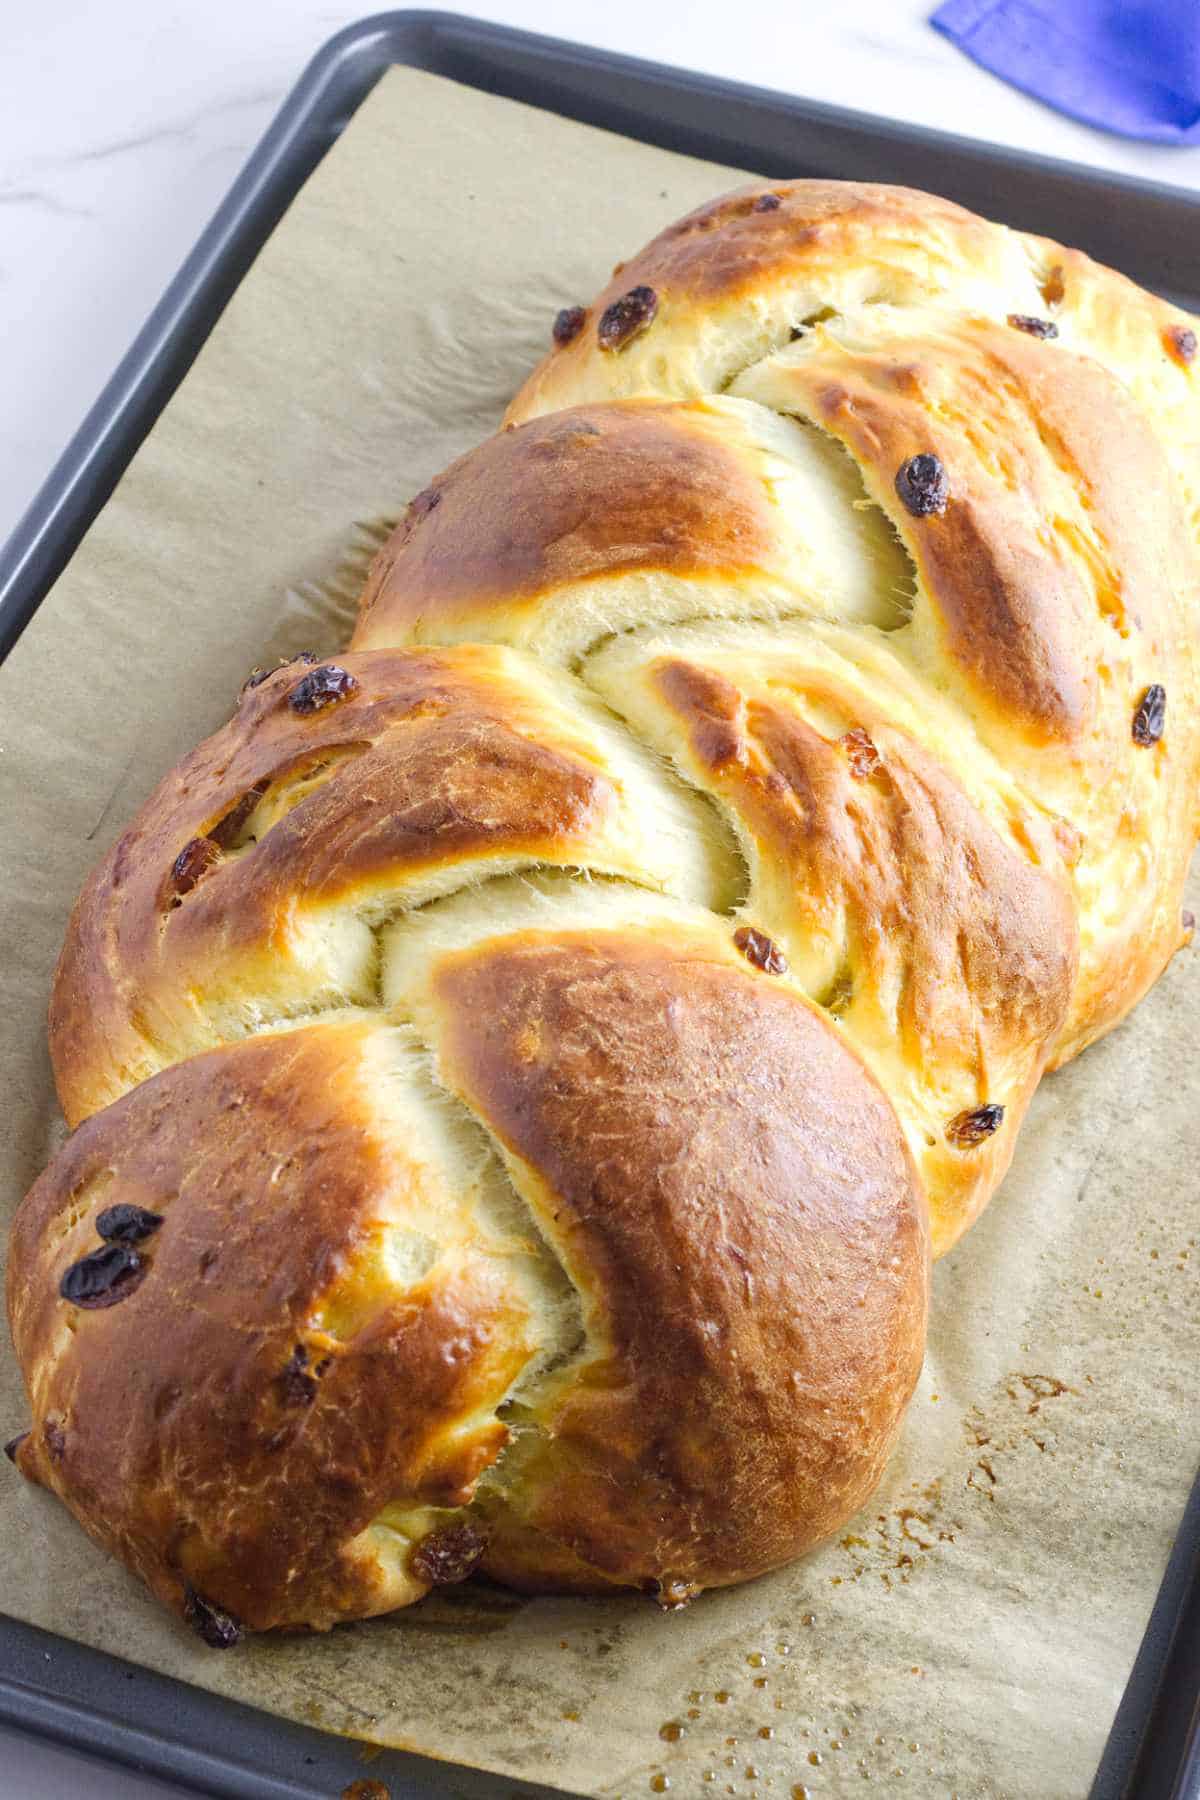 baked challah with raisins on a baking sheet.